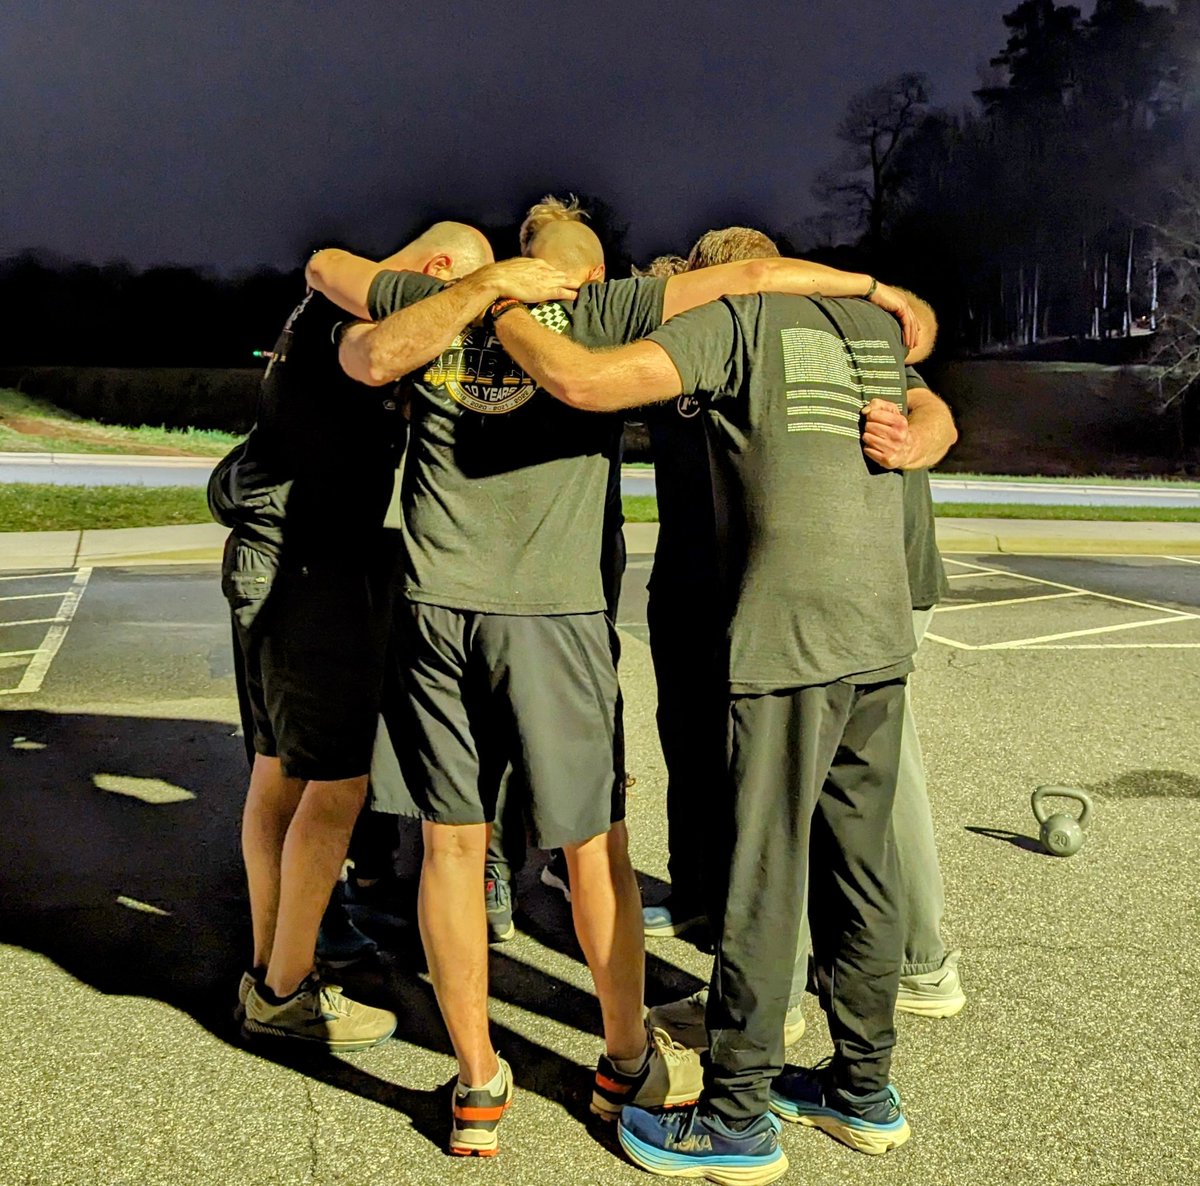 7x PAX for #AO_AngryDriver and 4x PAX for #AO_Wheelz - not bad for a Crisp Cool Morning. @F3Cincinnati Goetta joined us before heading back to the homebase. Hope his legs or arms didn't cramp. Repping @F3Nation in @MooresvilleNC with the @F3GhostFlagNC